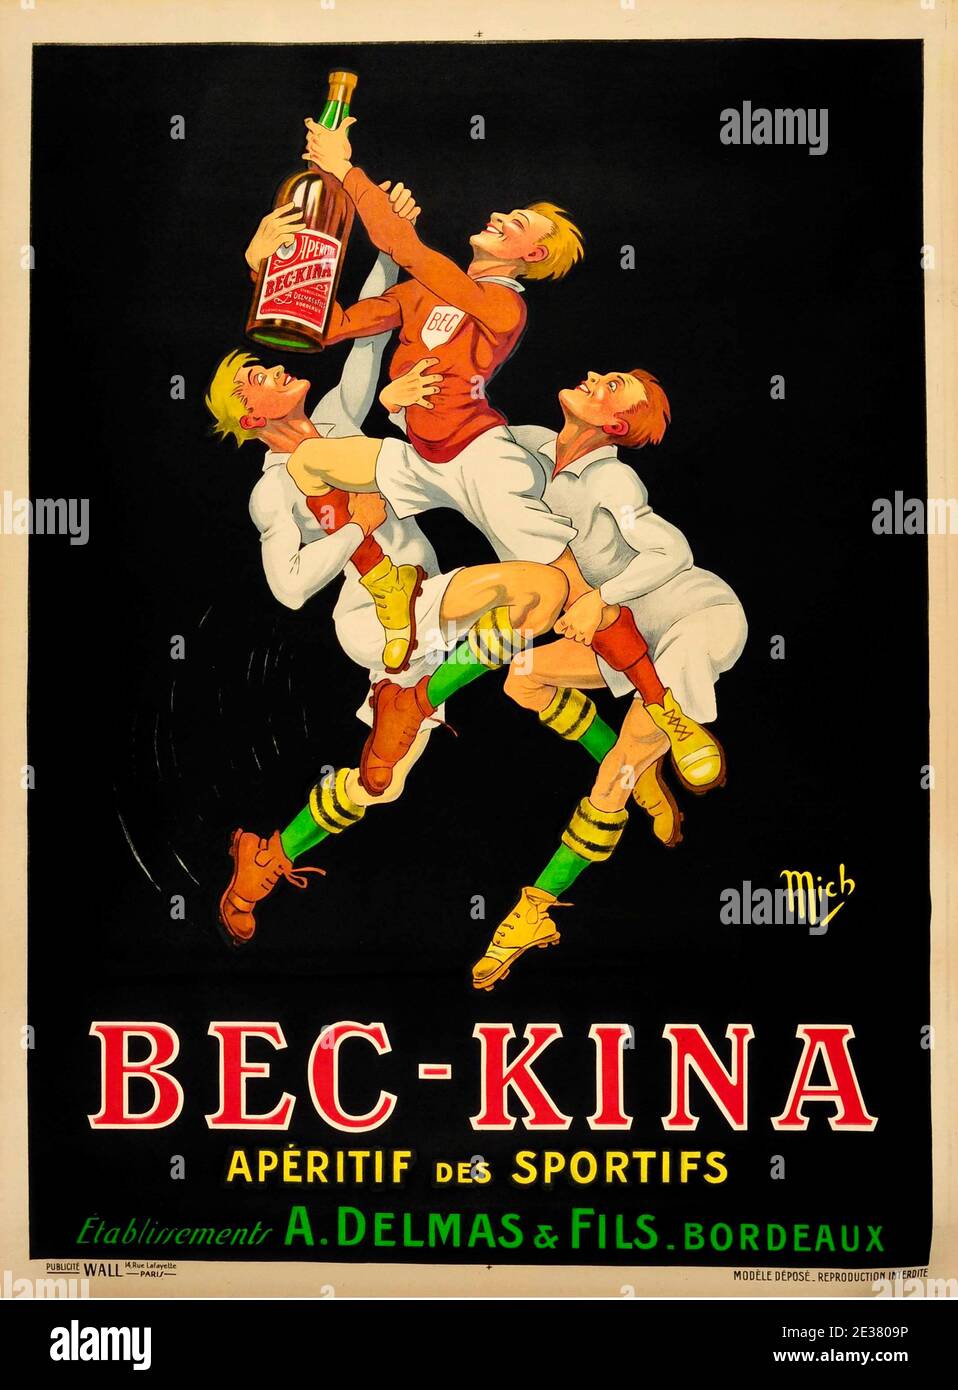 Vintage poster showing three rugby players competing for a bottle of Bec-Kina. Design by French artist Michel Liebeaux better known as Mich - 1925 Stock Photo